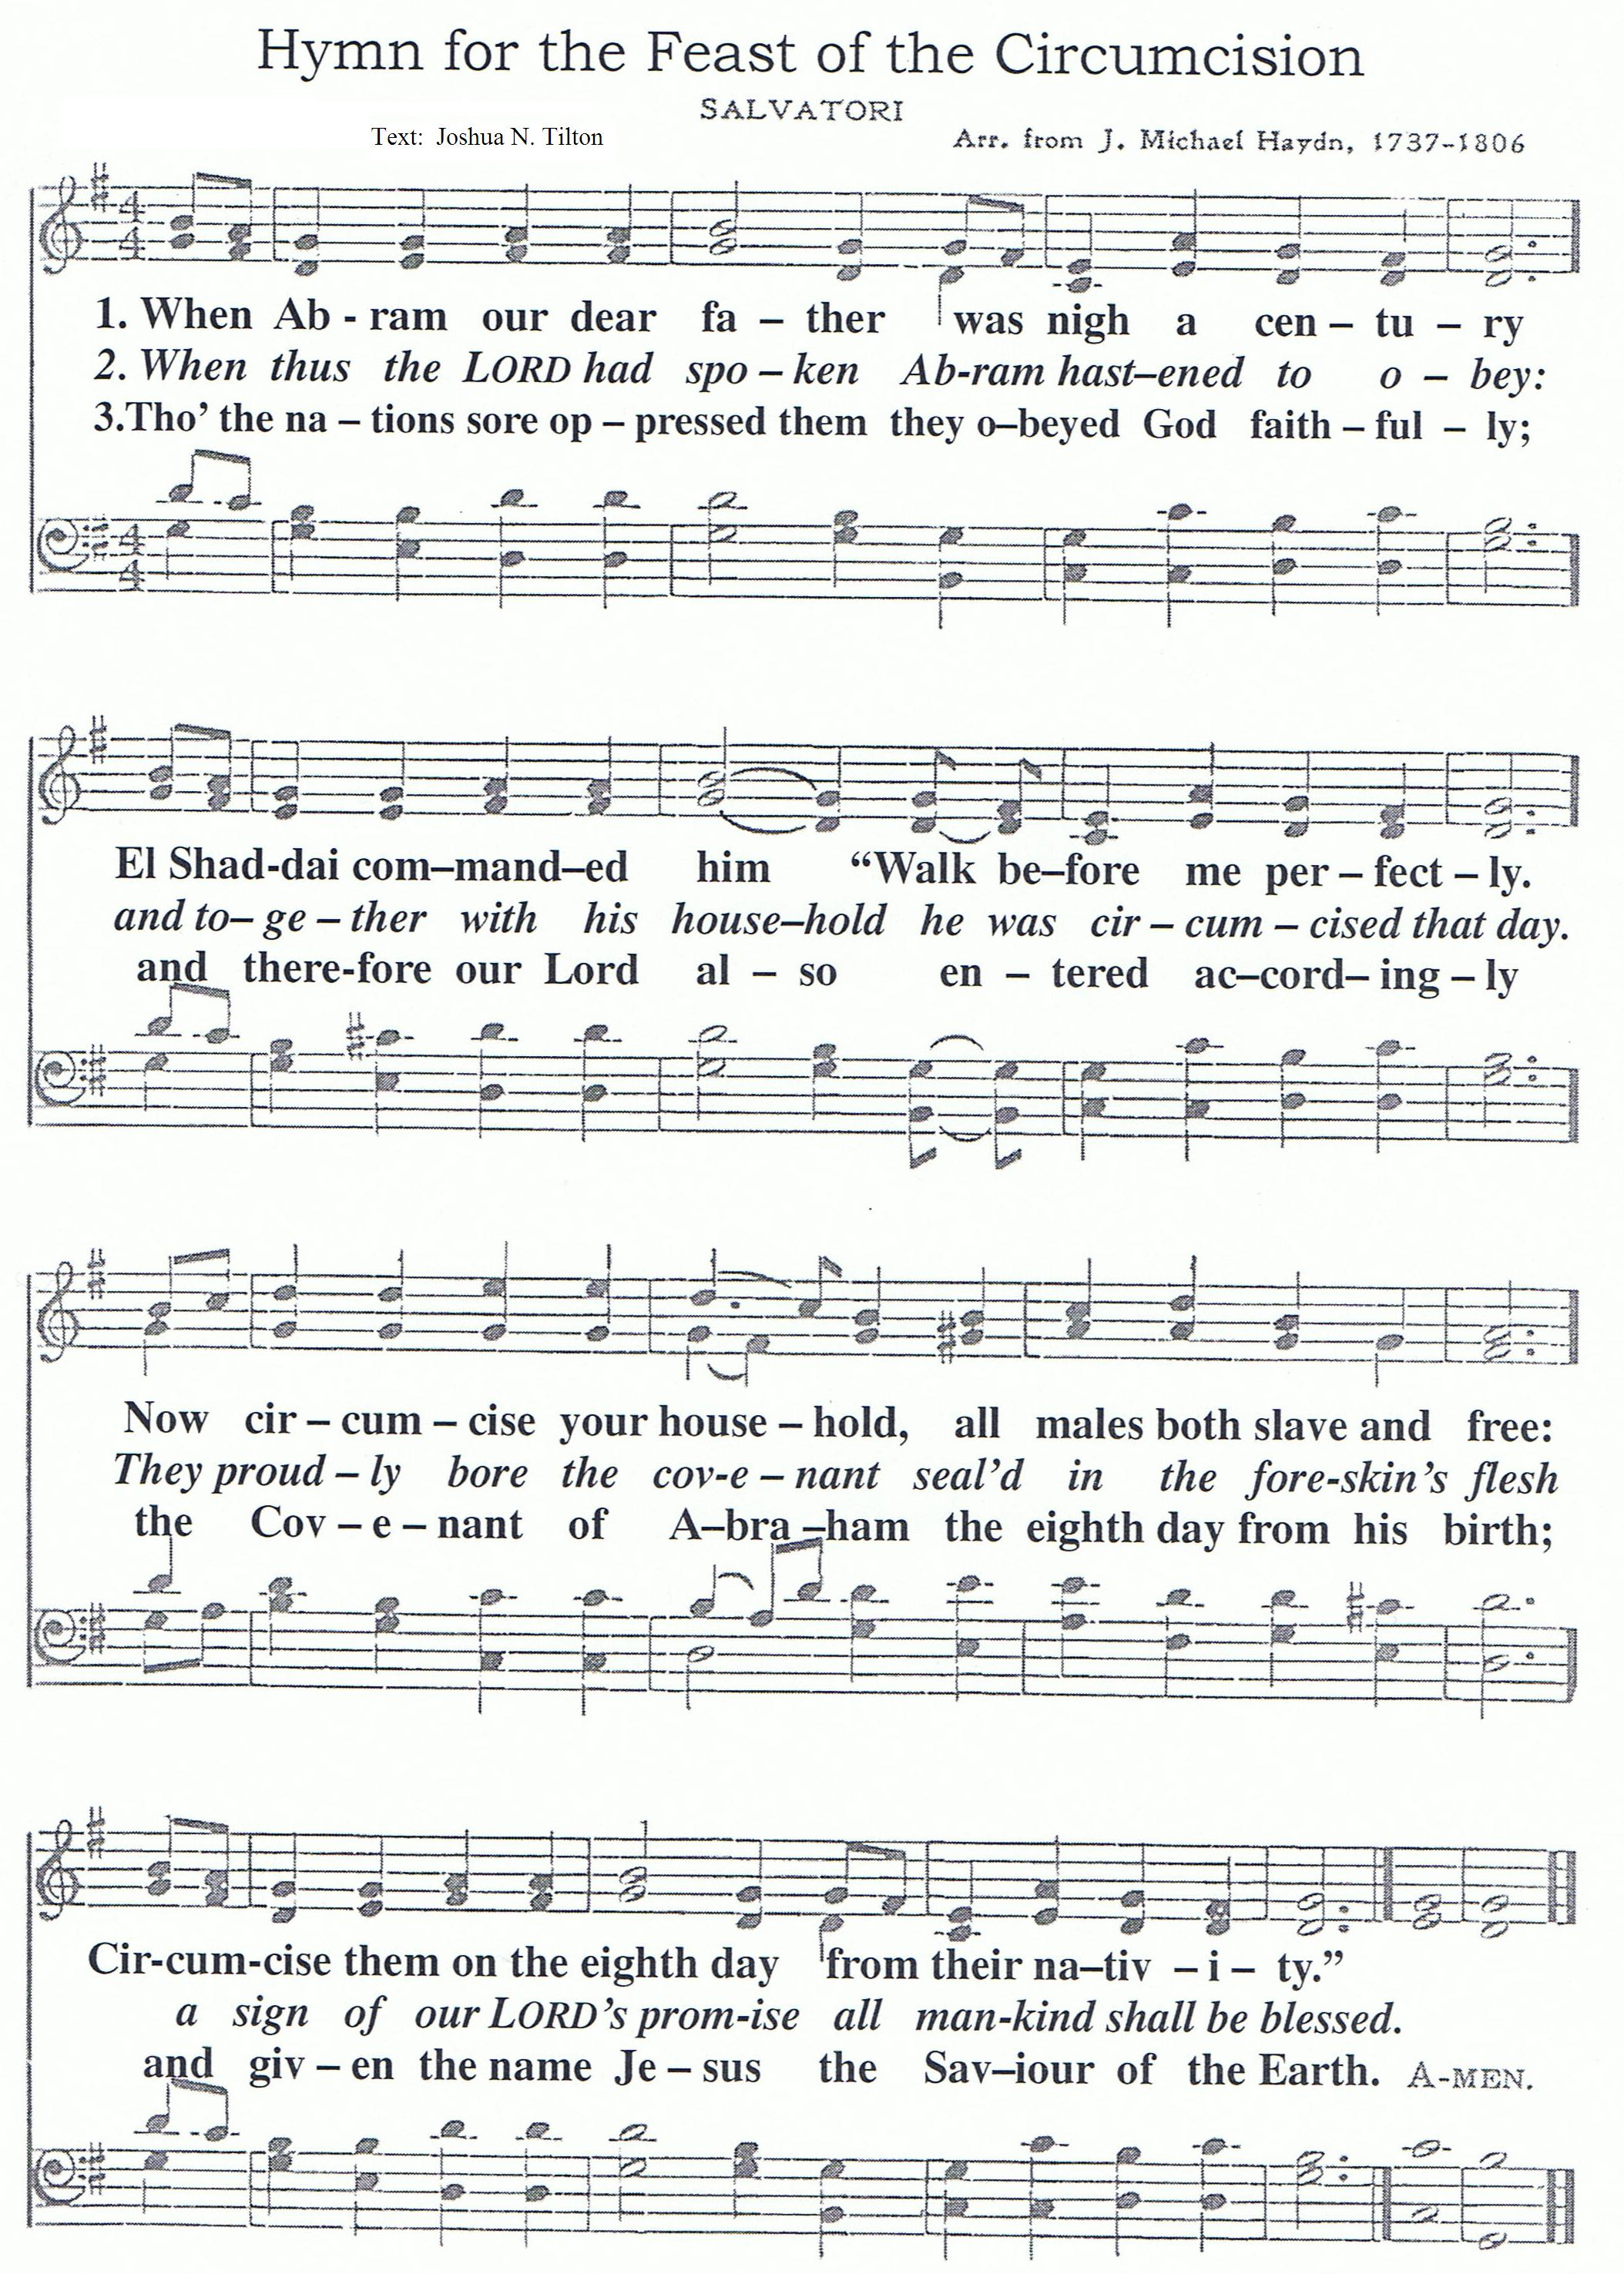 Hymn for the Feast of the Circumcision